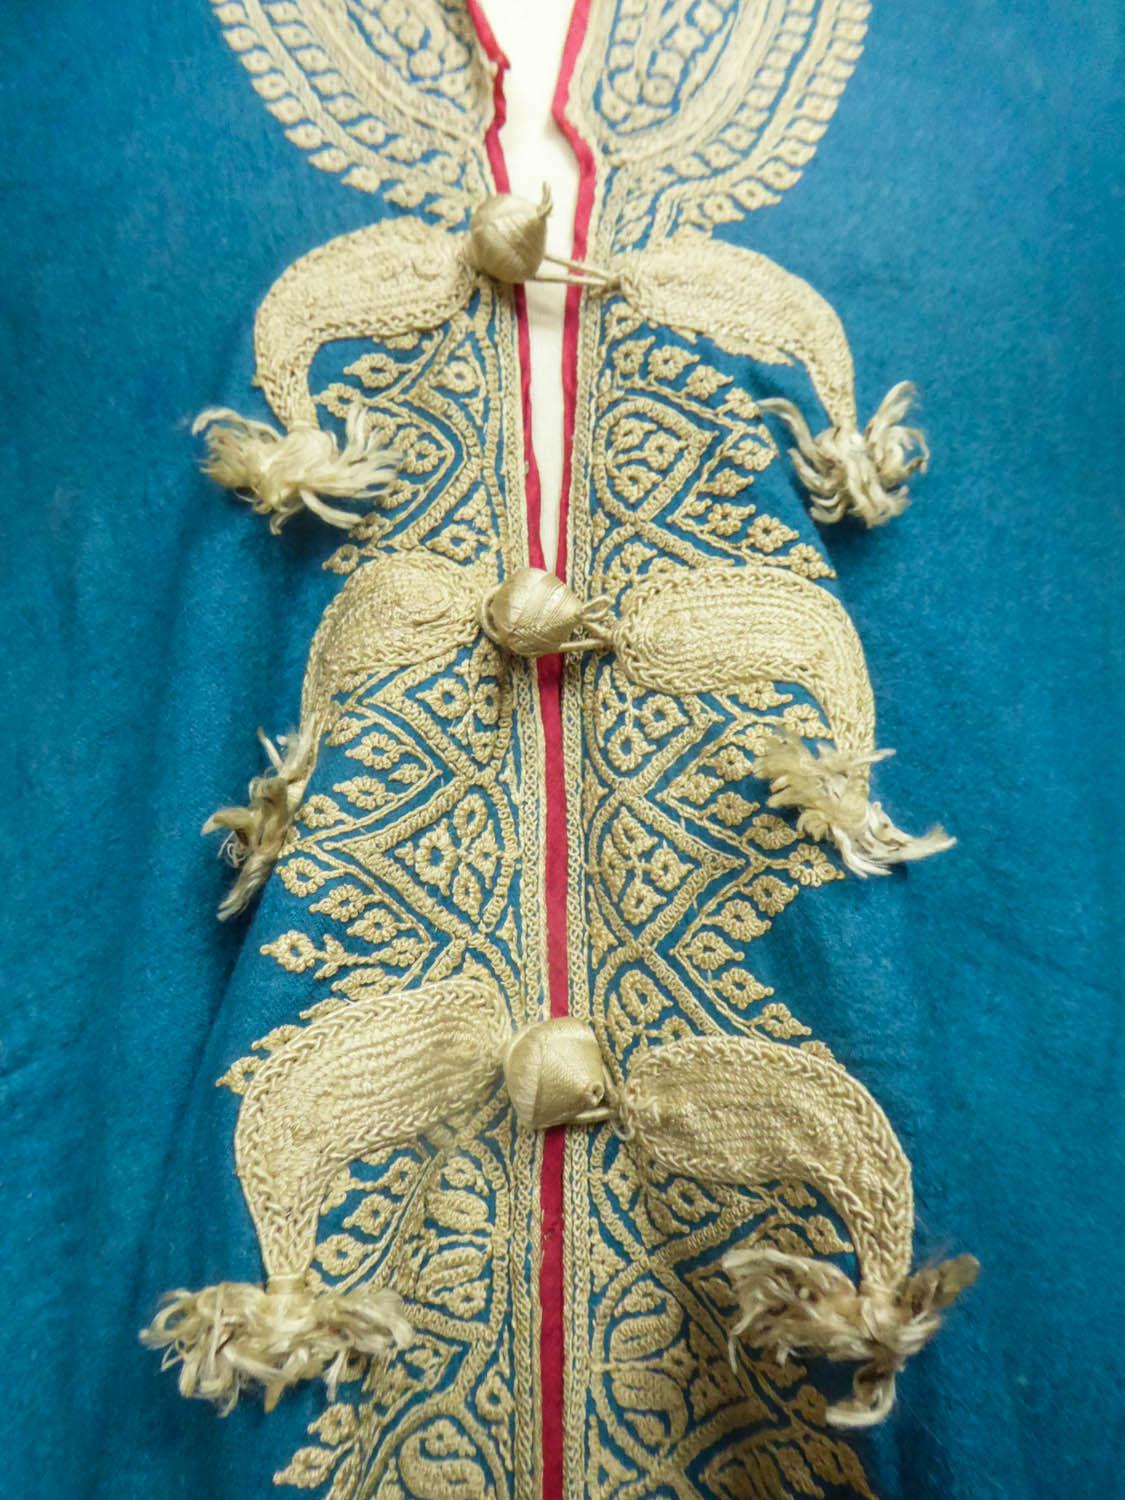 Women's or Men's Dignitary coat or Choga - Indes Punjab 19th century